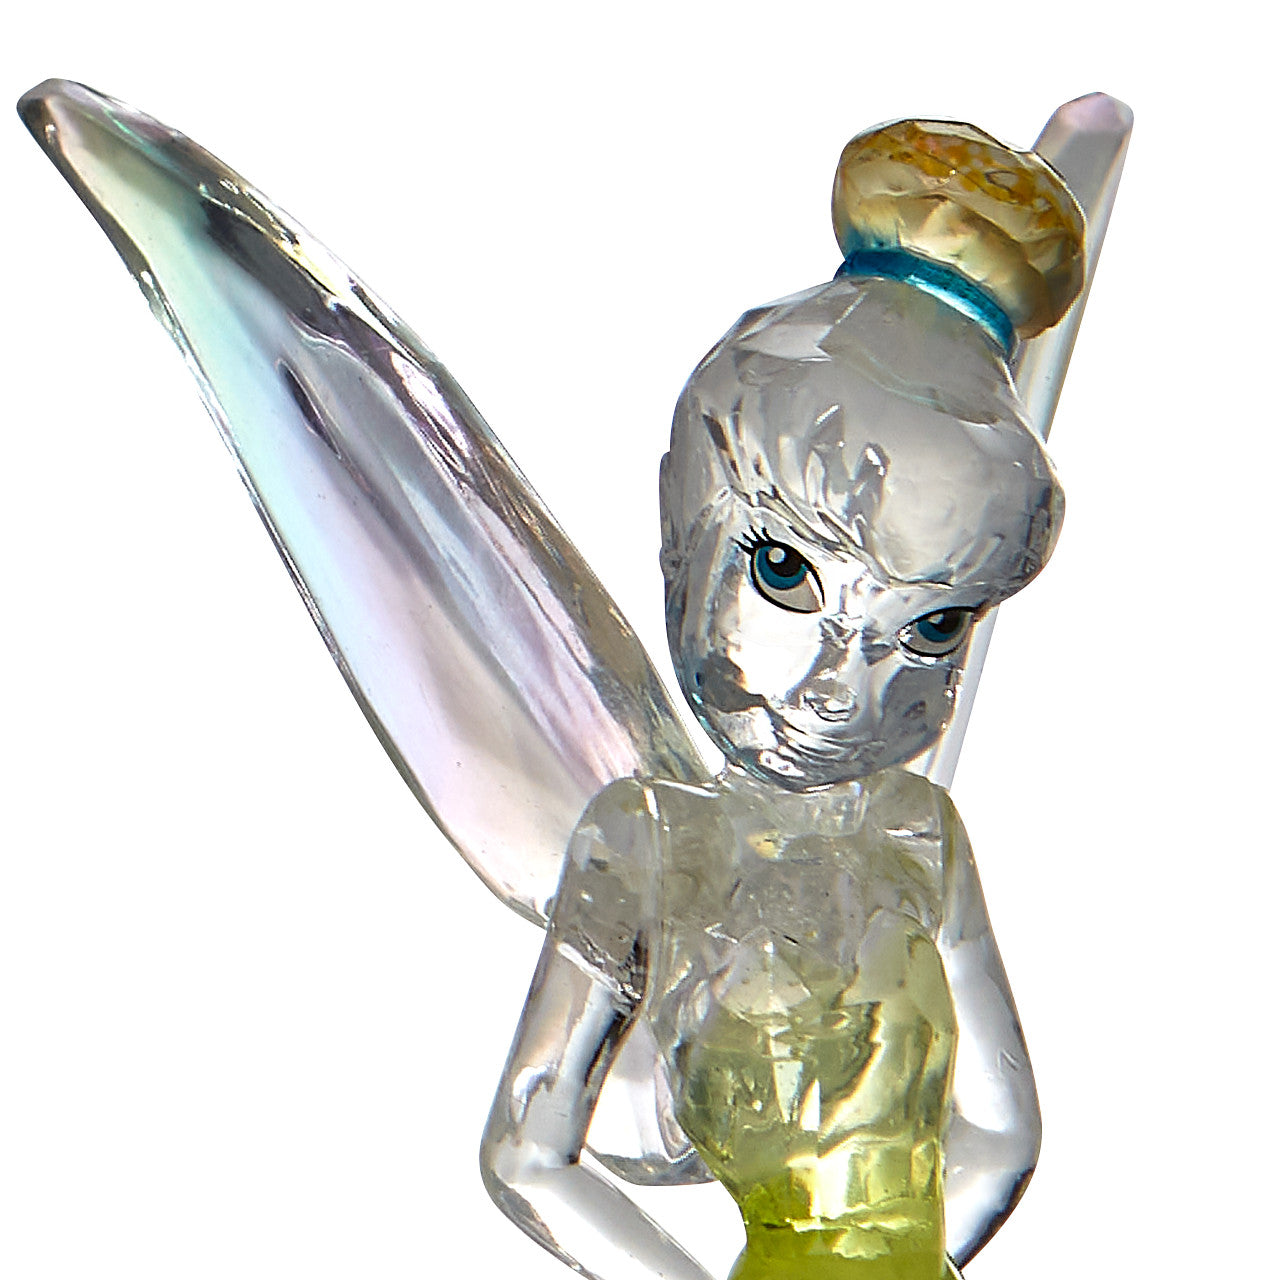 Tinkerbell Facets Figurine